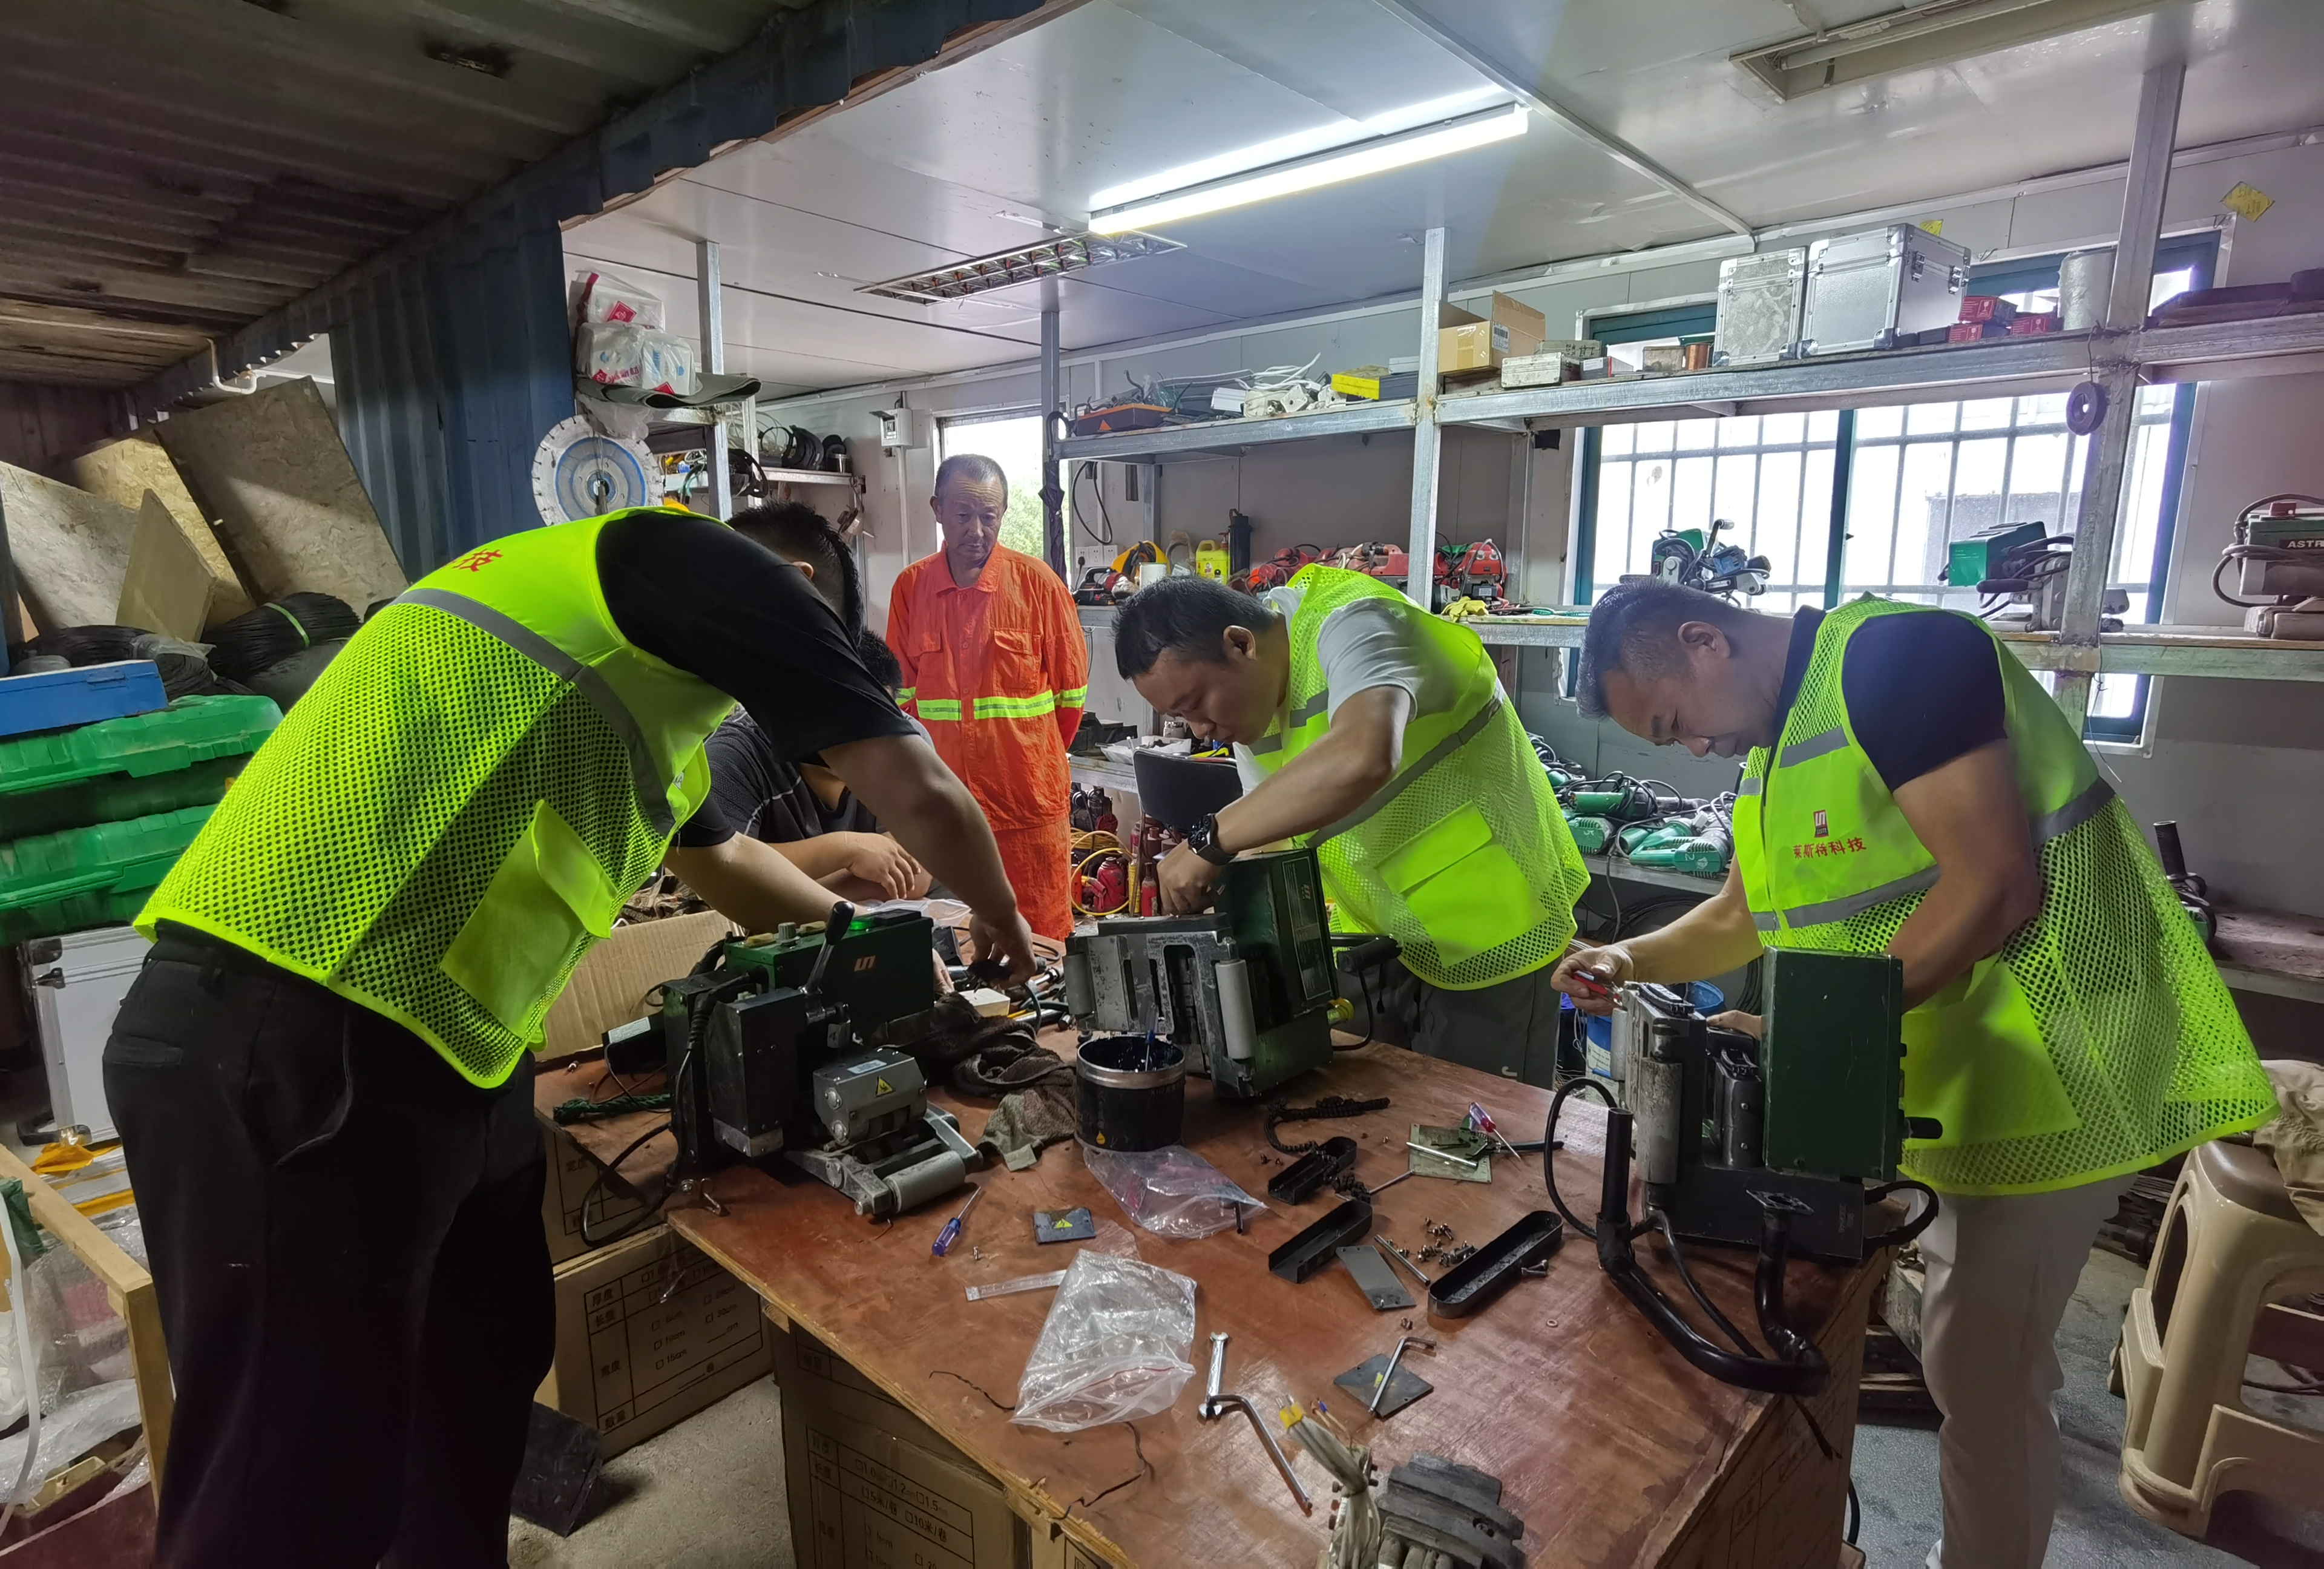 Craftsmanship and Service Innovation | Lesite carries out a series of after-sales maintenance services and skill training to improve the quality of after-sales service